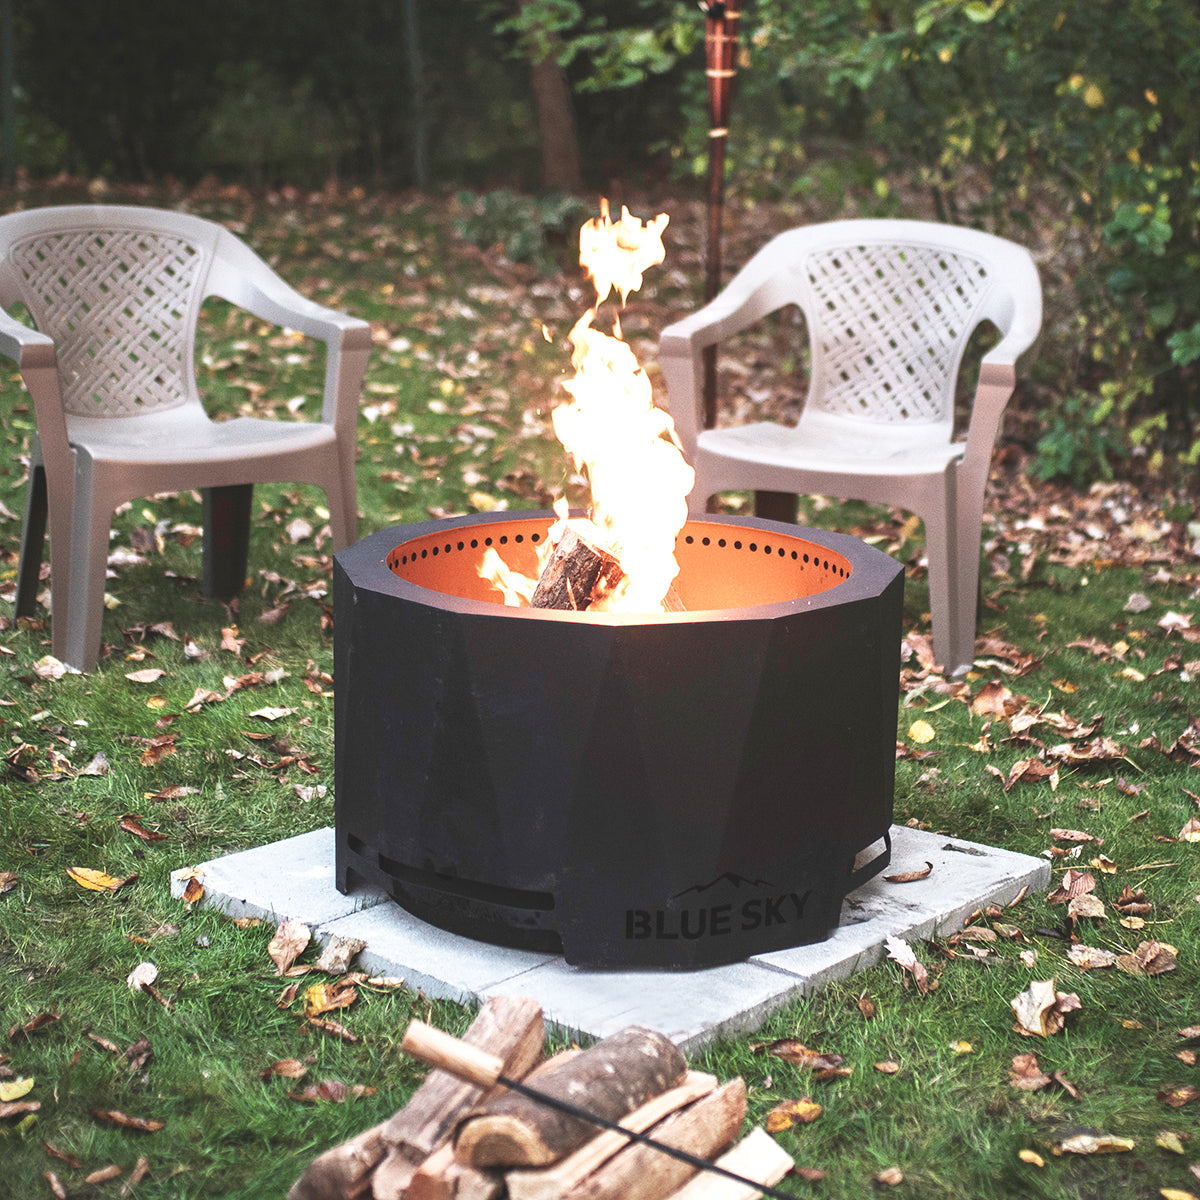 The Mammoth Smokeless Patio Fire Pit - Blue Sky Outdoor Living